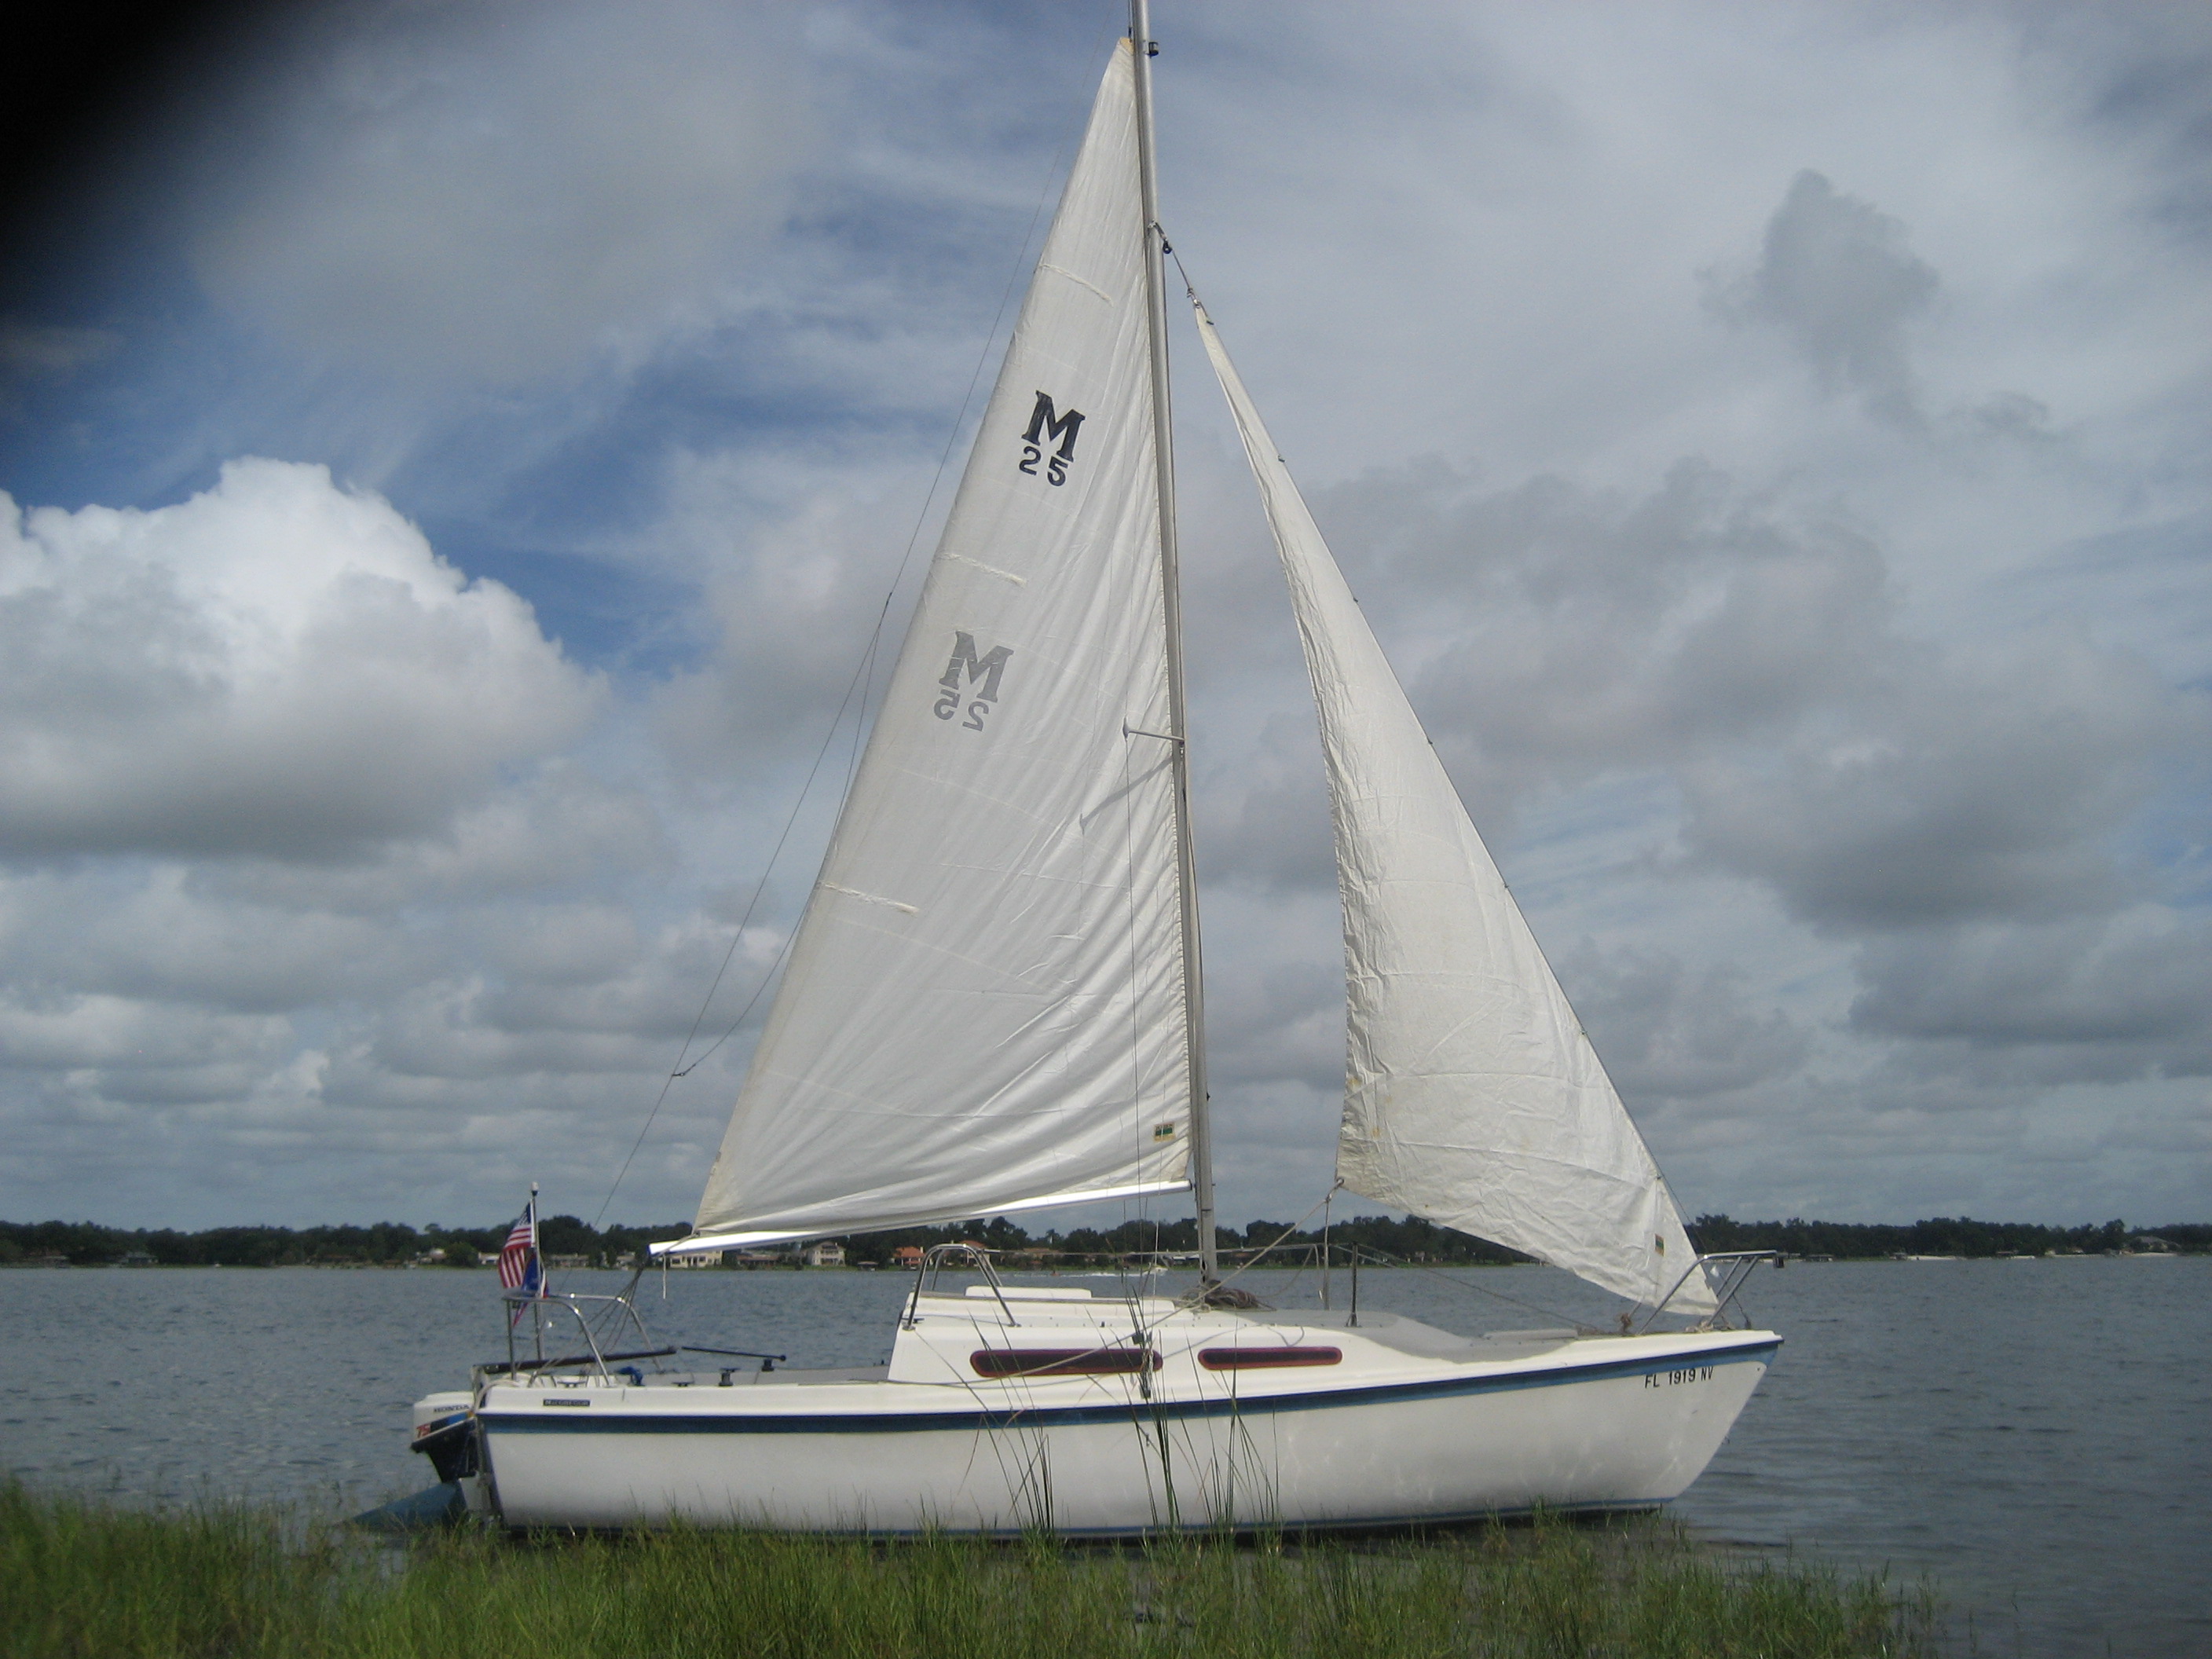 Our Boat Story - The Sailing Rode